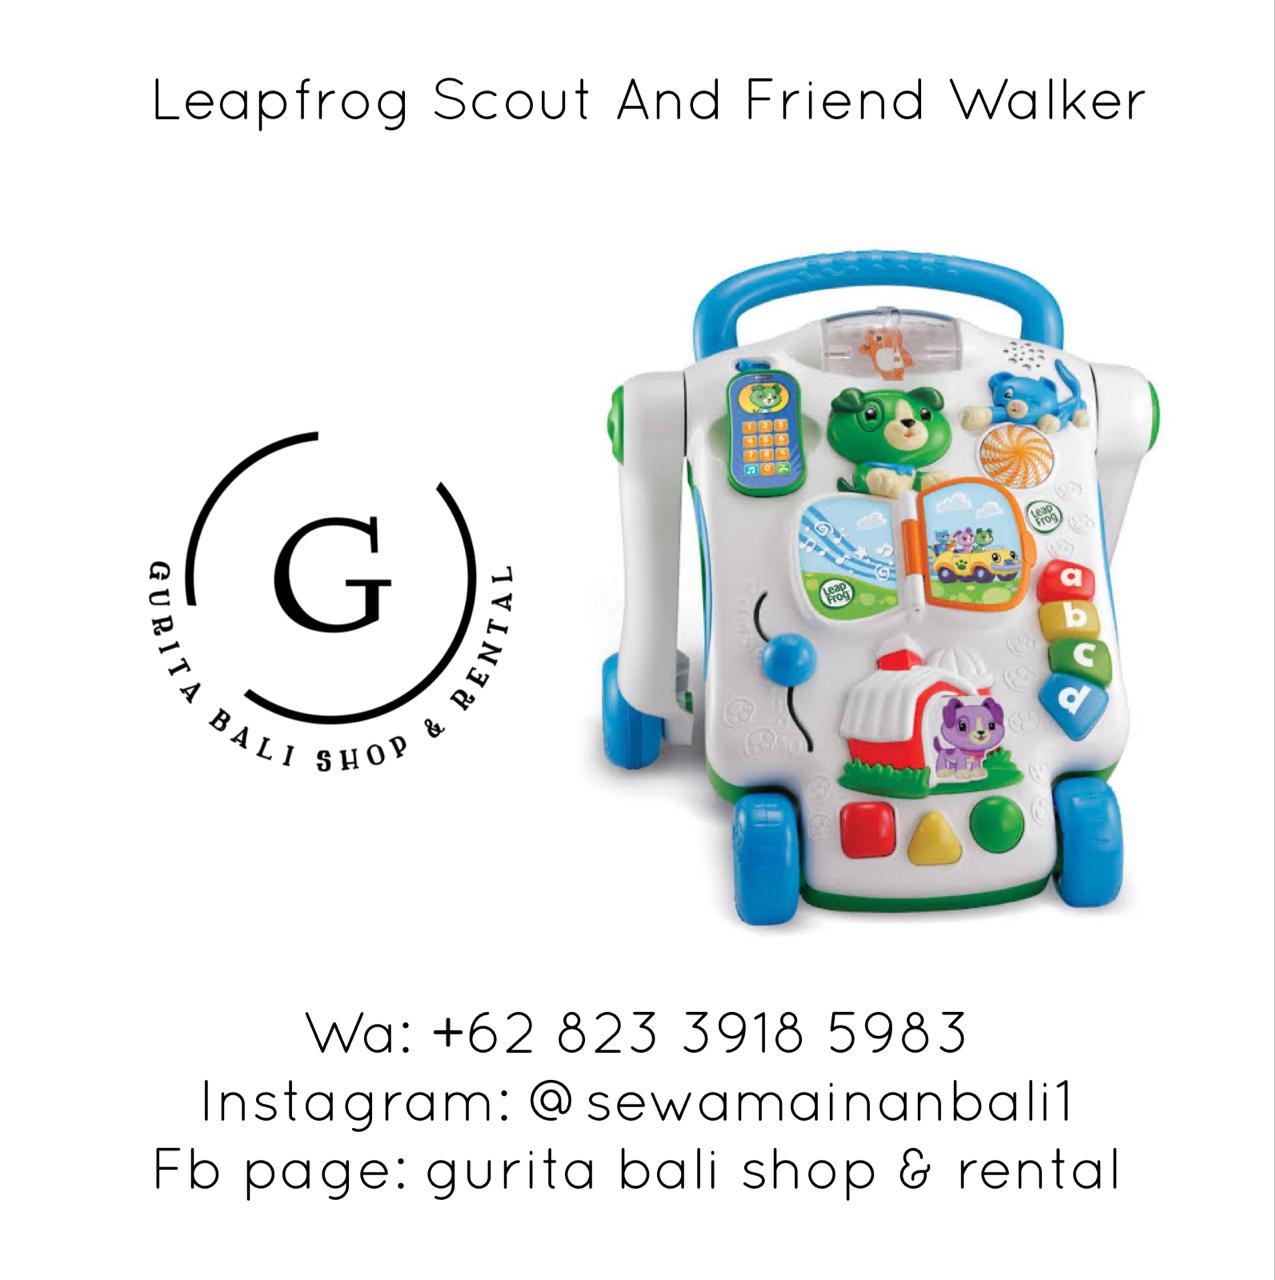 LEAP FROG SCOUT AND FRIEND WALKER